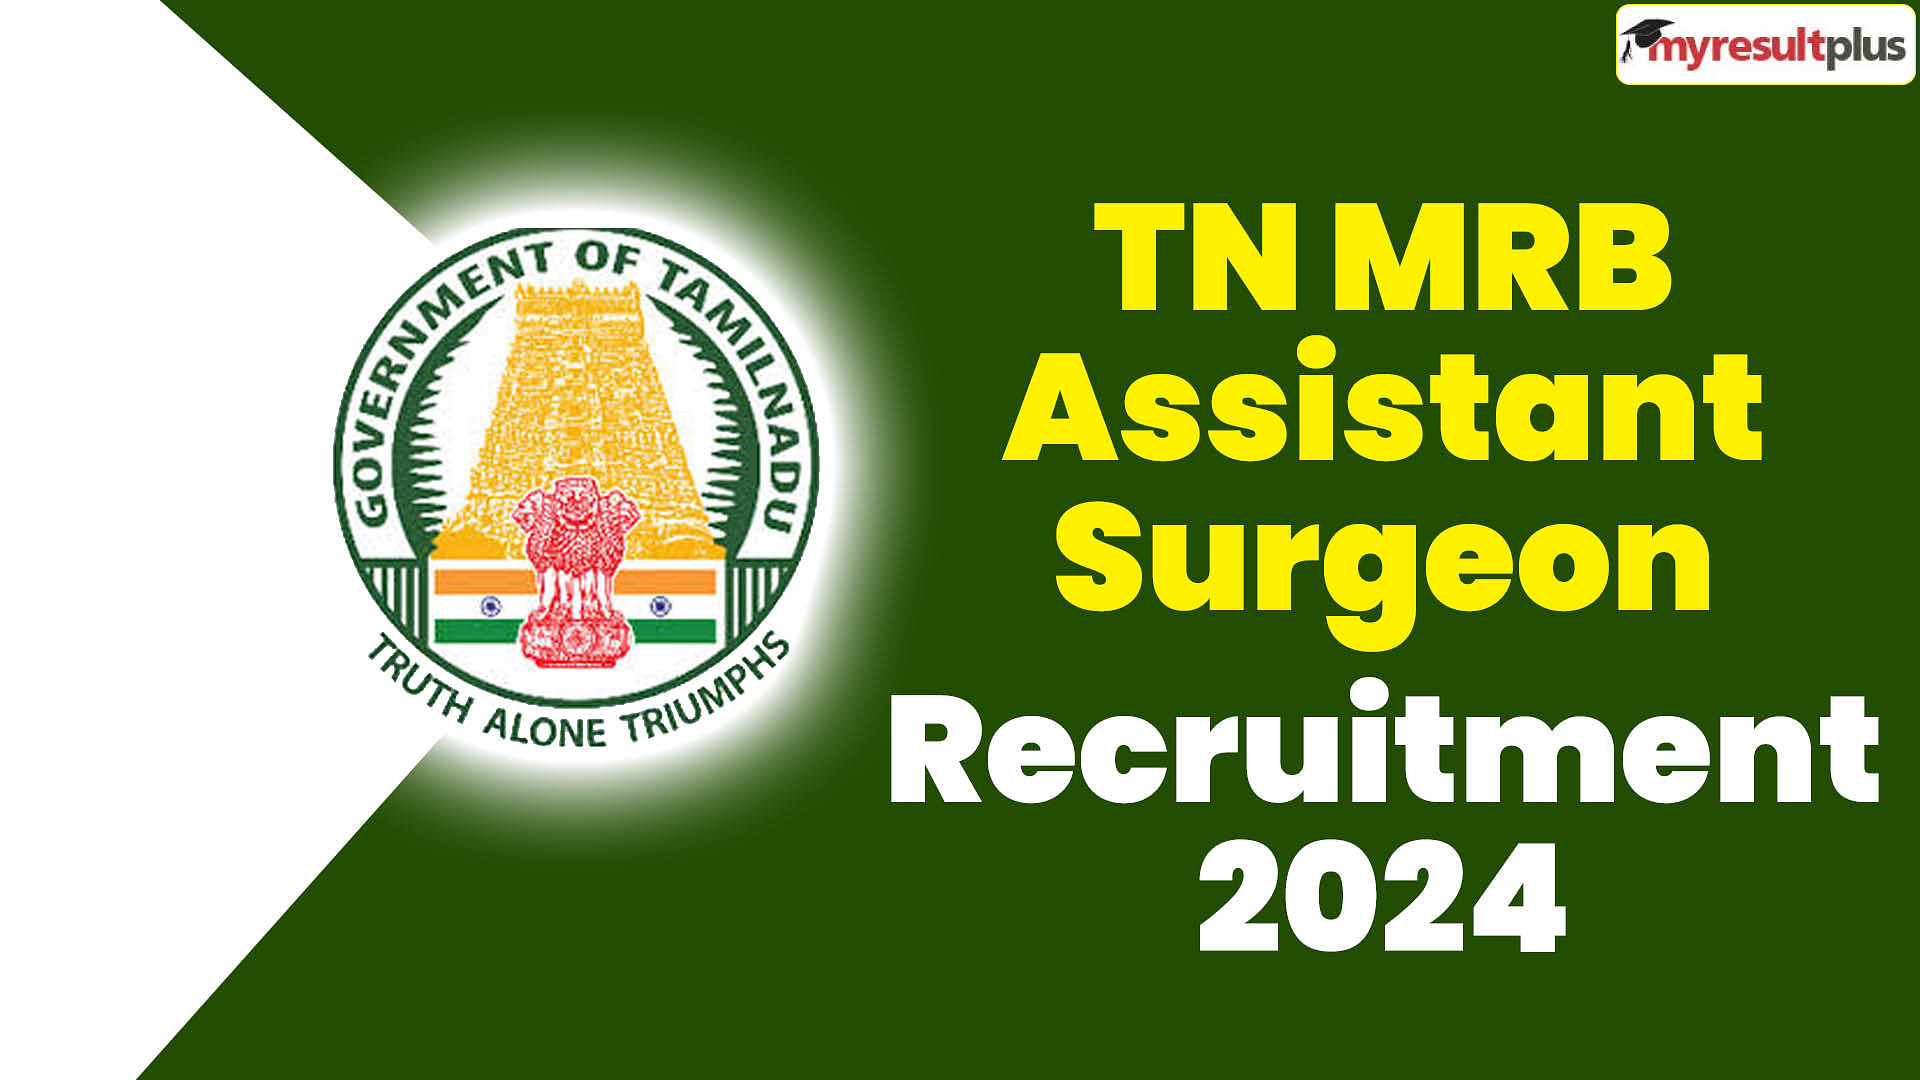 TN MRB Recruitment 2024: Application window open for 2500+ posts, Read more details here